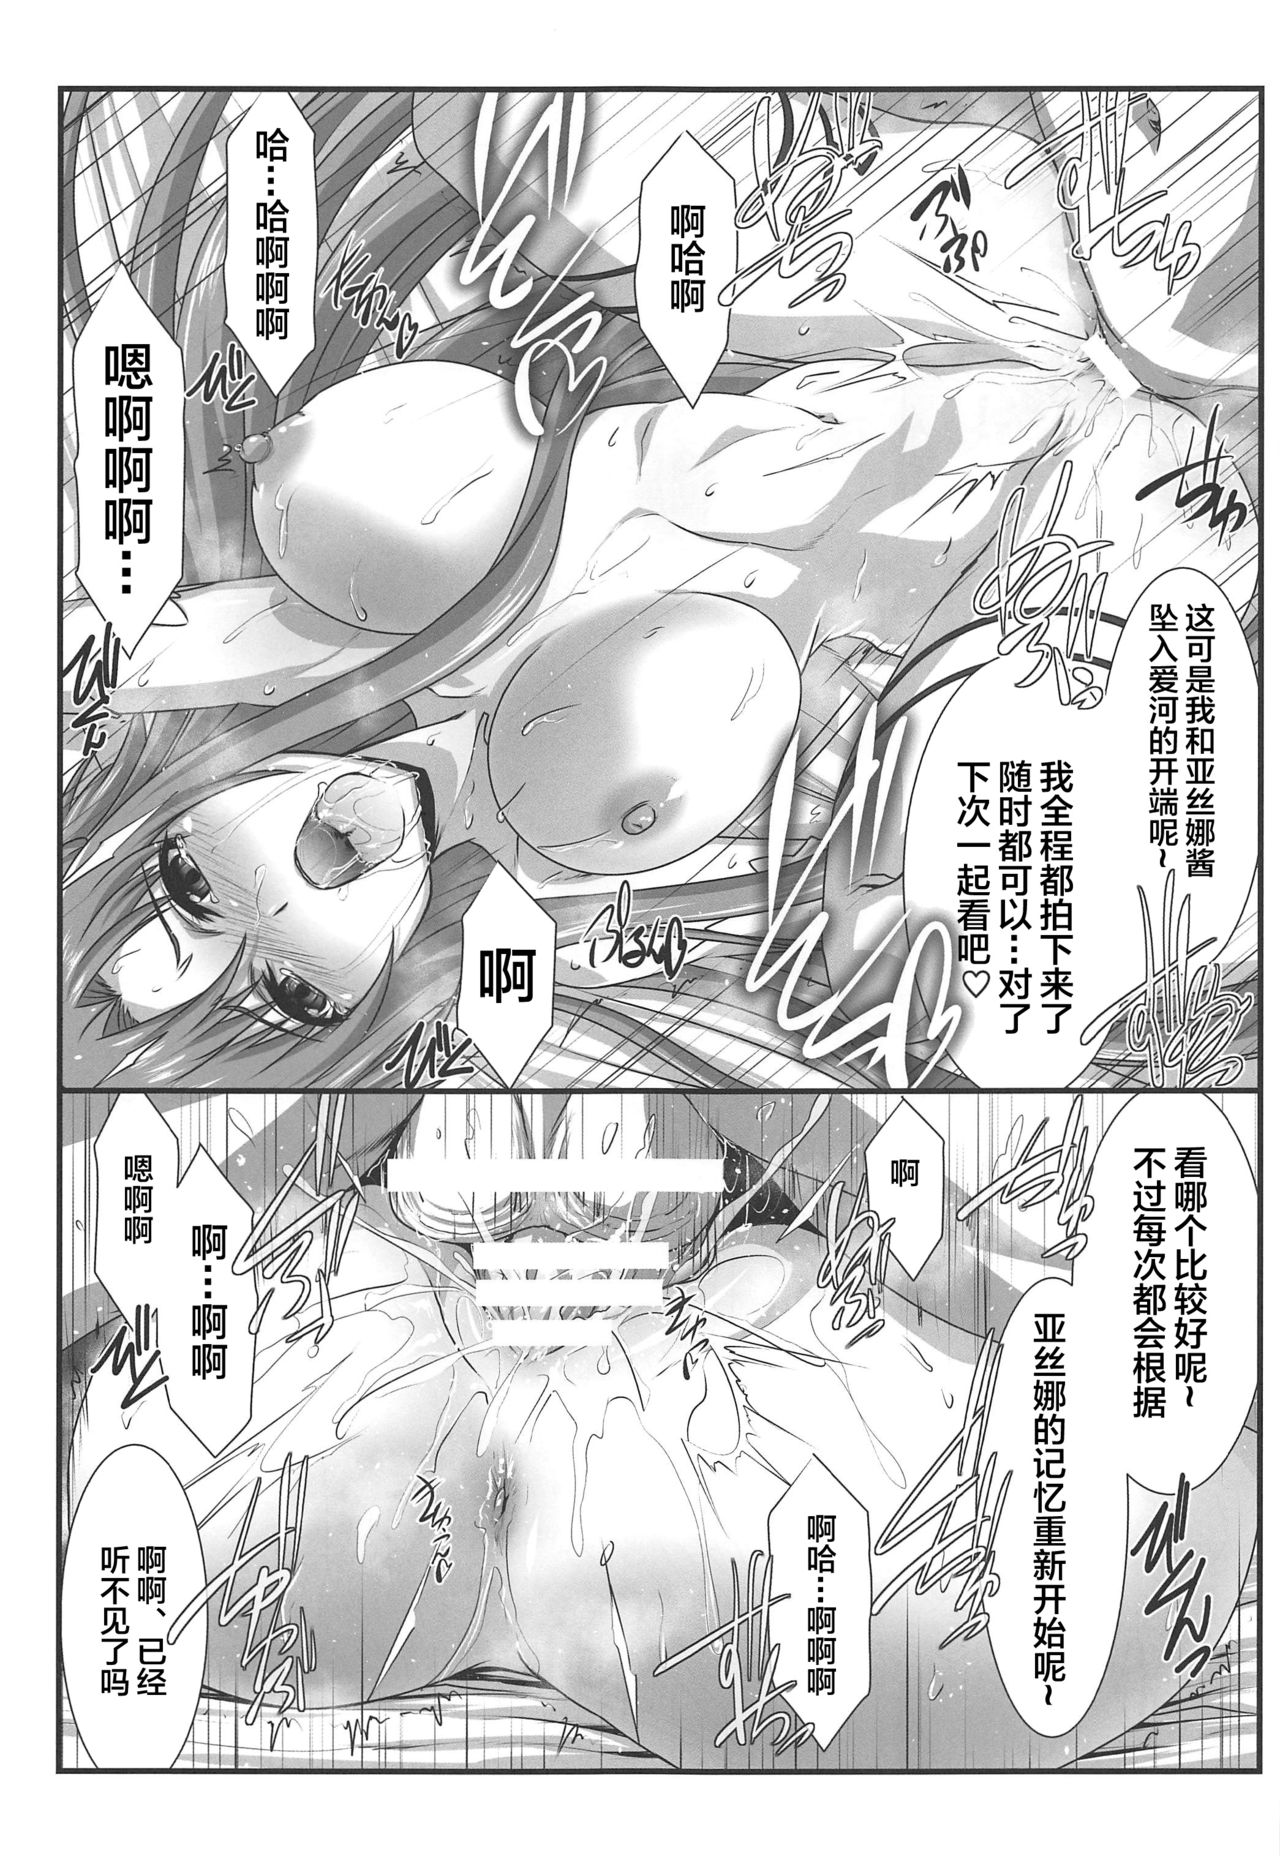 (C96) [STUDIO TRIUMPH (Mutou Keiji)] Astral Bout Ver. 40 (Sword Art Online) [Chinese] [新桥月白日语社] page 18 full